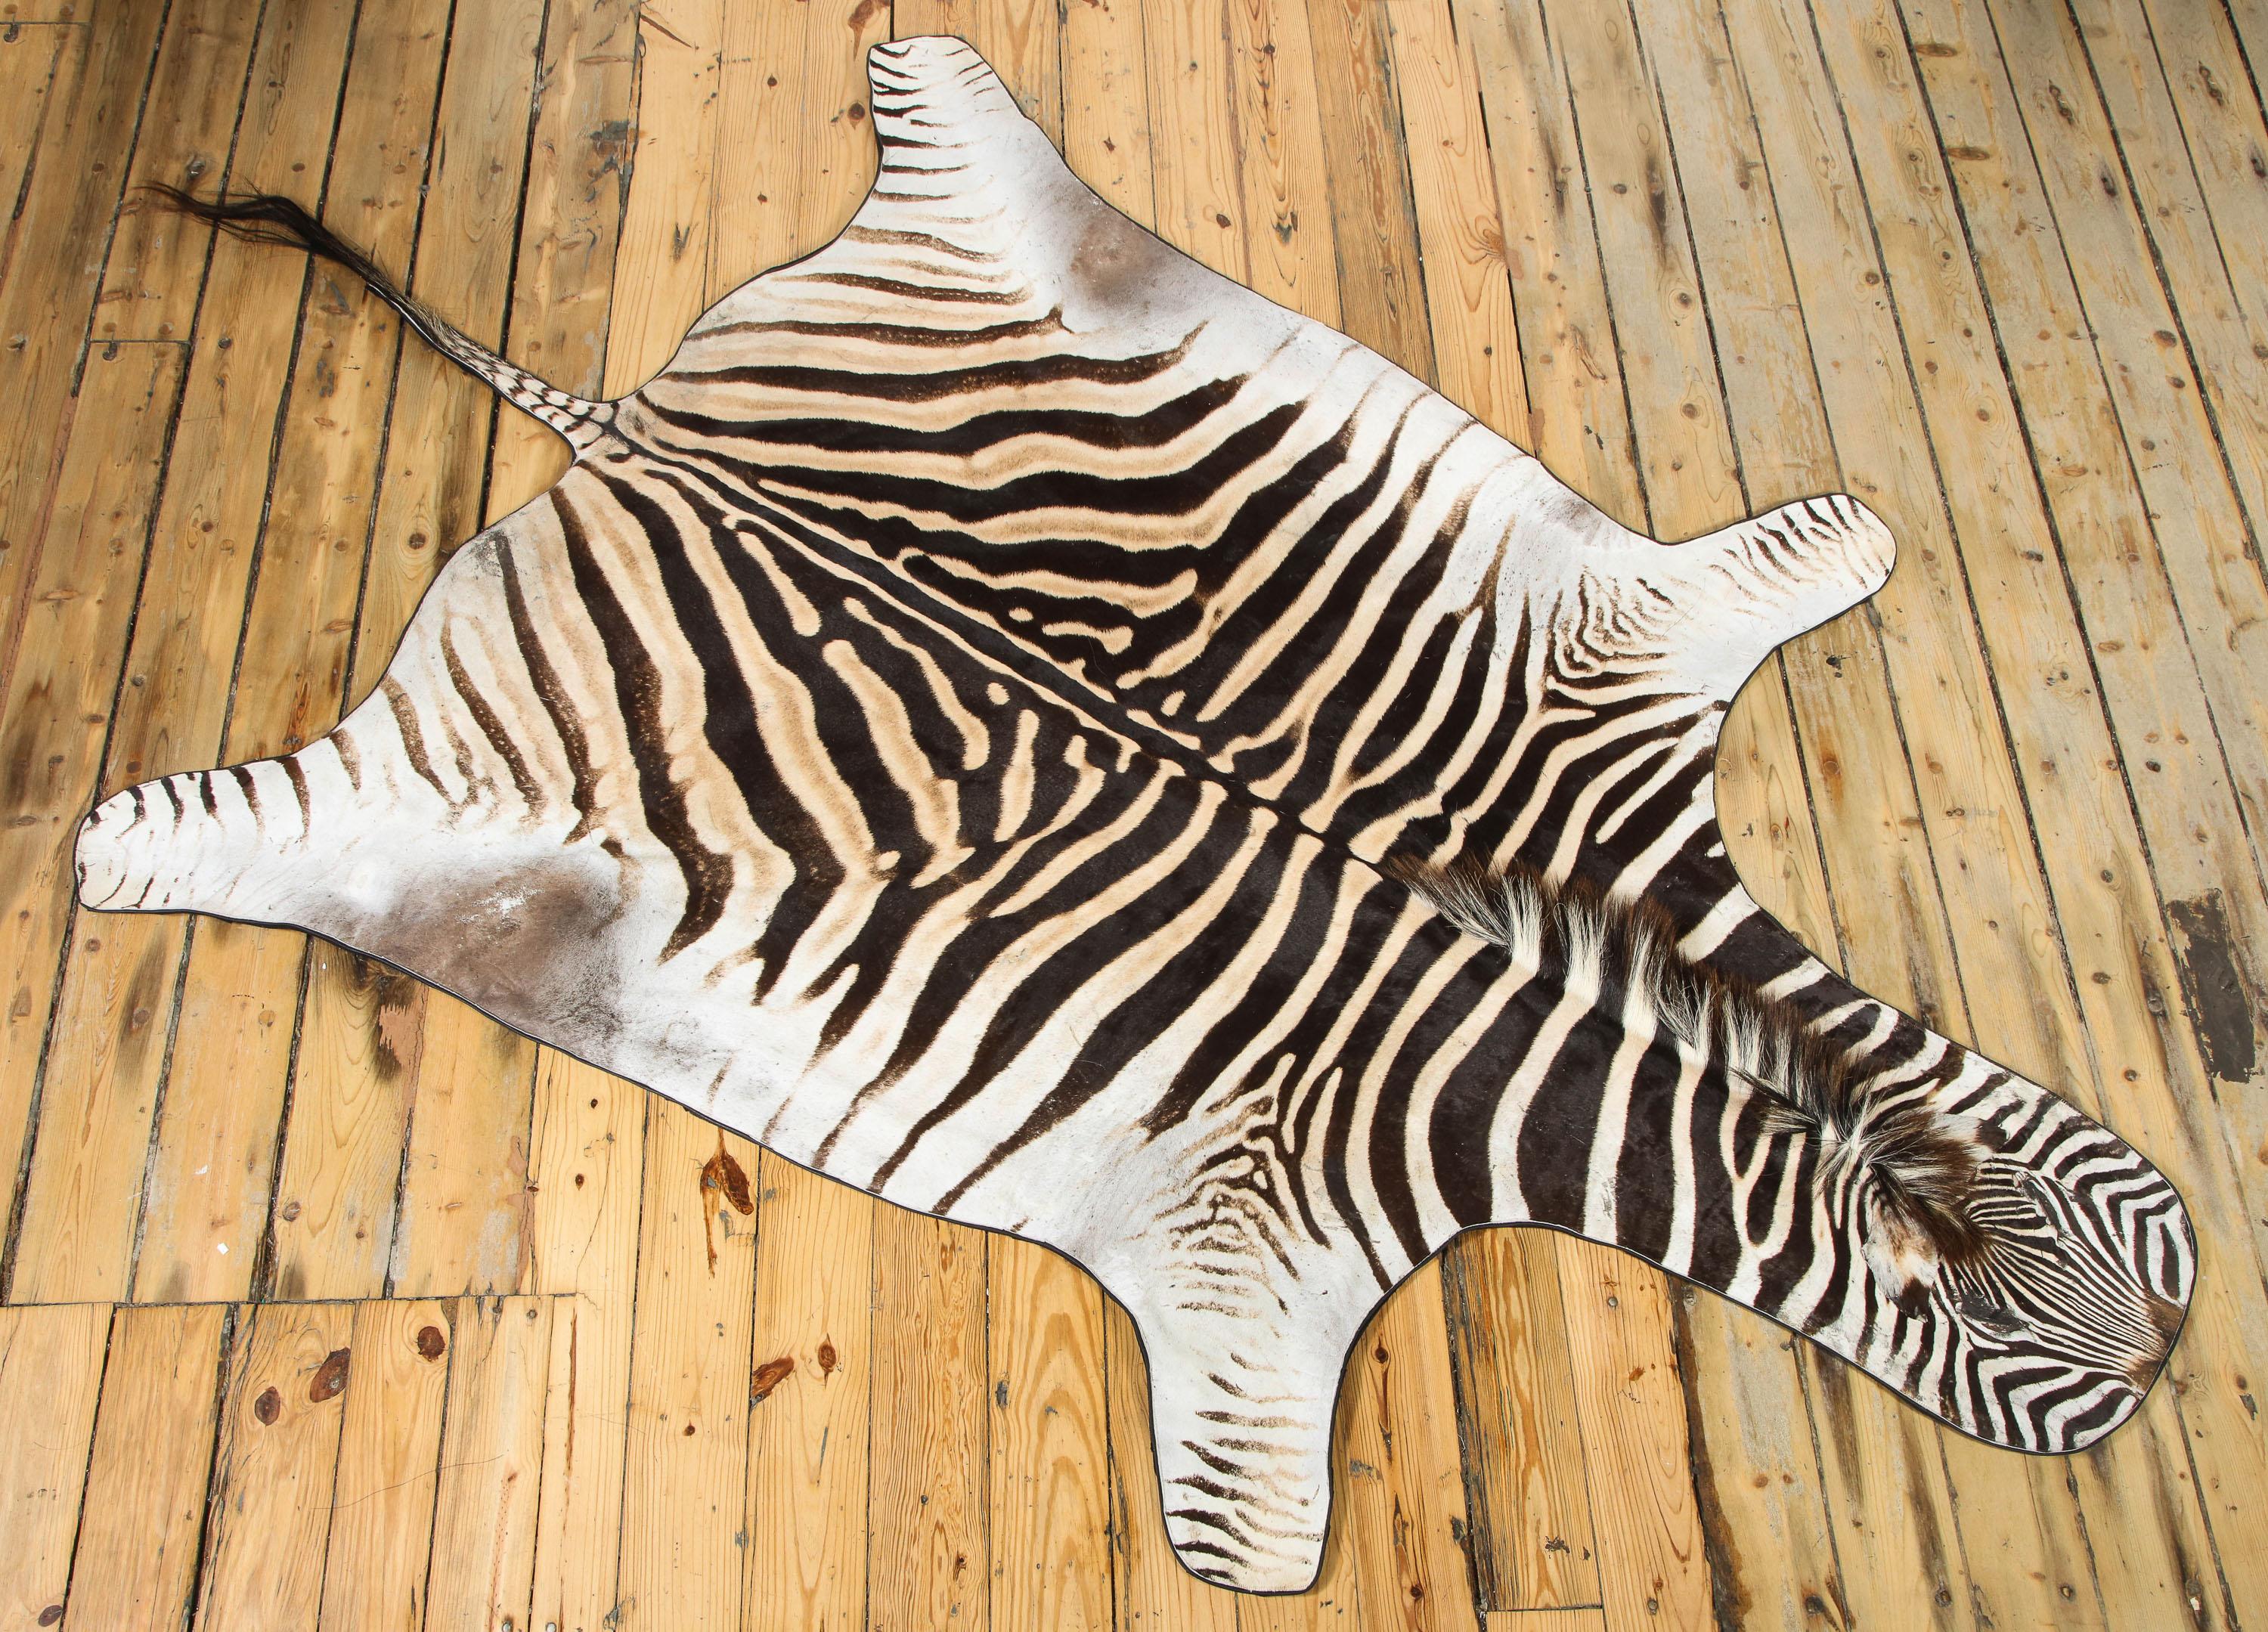 Decorative new zebra rug from South Africa. The hide is backed with a wool felt fabric and trimmed with leather all around.
This zebra hide is sold but we just got in a new one. The length is 91 inches, not included the tail and the width is 56